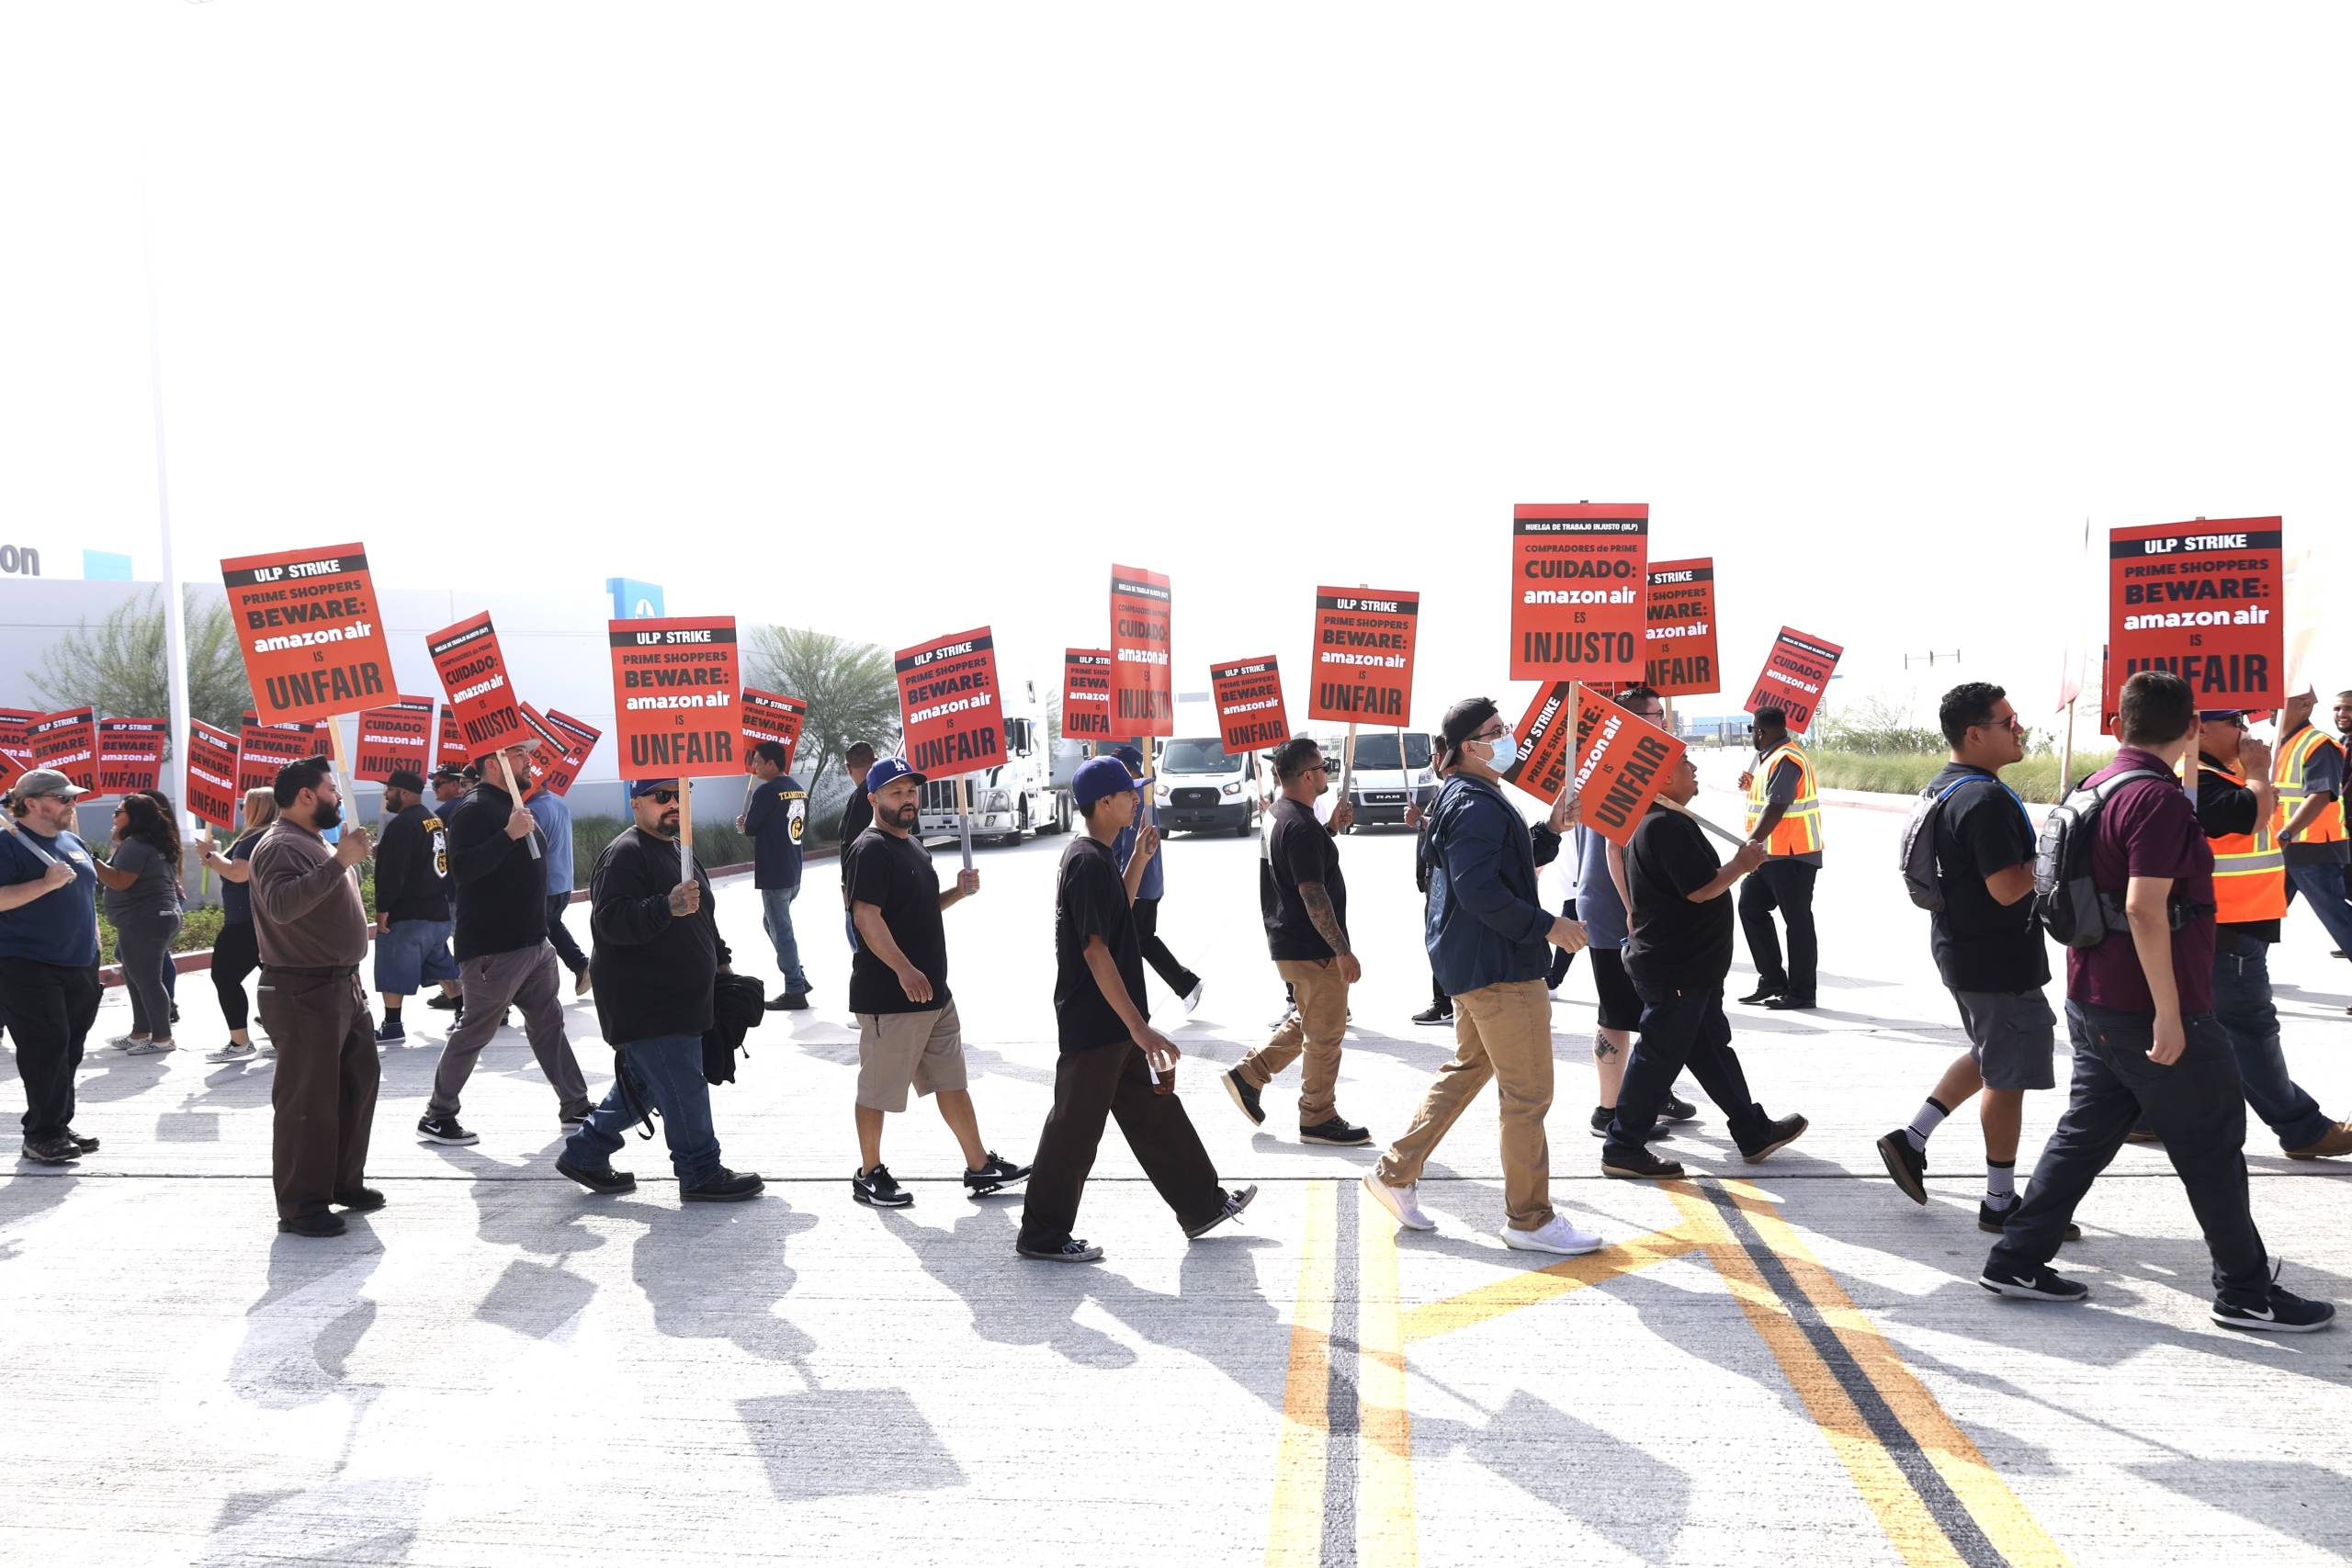 Dozens of strikers march with signs on a tarmac.